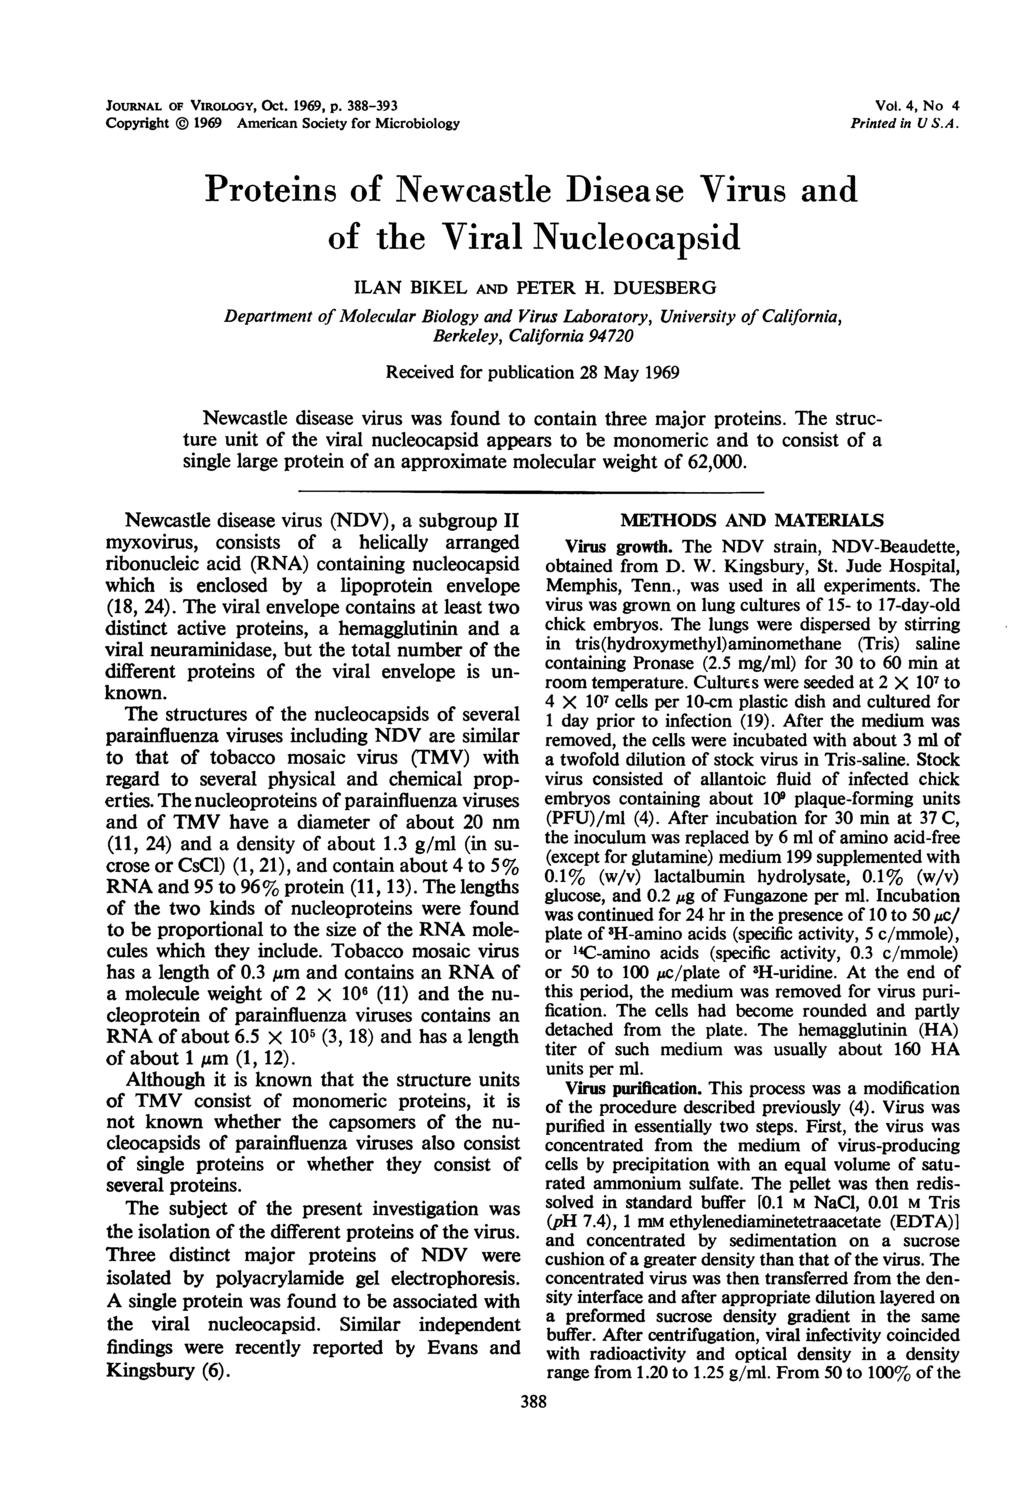 JOURNAL OF VIROLOGY, Oct. 1969, p. 388-393 Vol. 4, No 4 Copyright @ 1969 American Society for Microbiology Printed in U S.A. Proteins of Newcastle Disea se Virus and of the Viral Nucleocapsid ILAN BIKL AND PTR H.